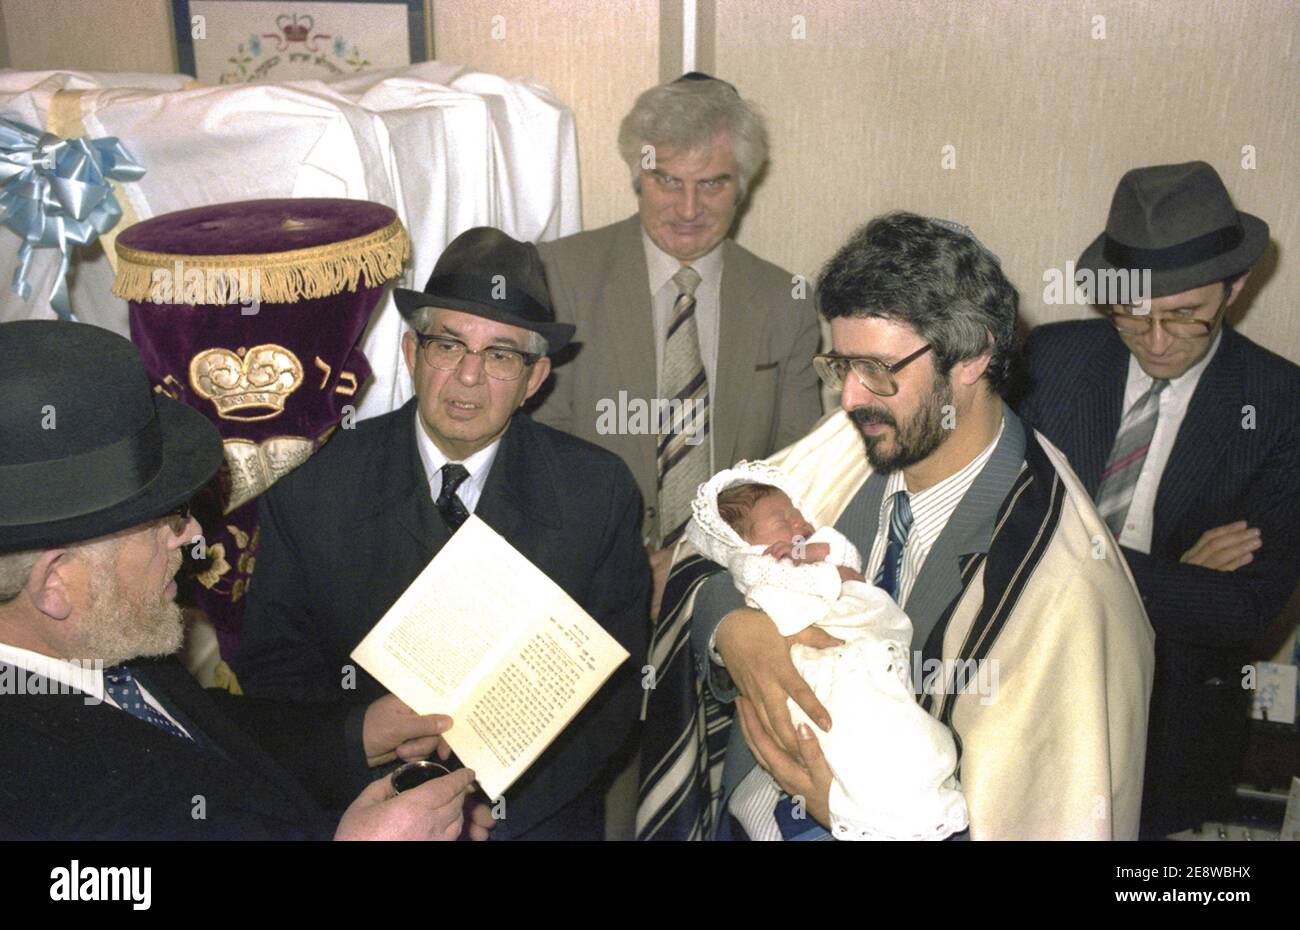 A father holds his eight day old son to received a blessing before the Brit Milah (circumcision procedure) in a Birmingham home. Stock Photo